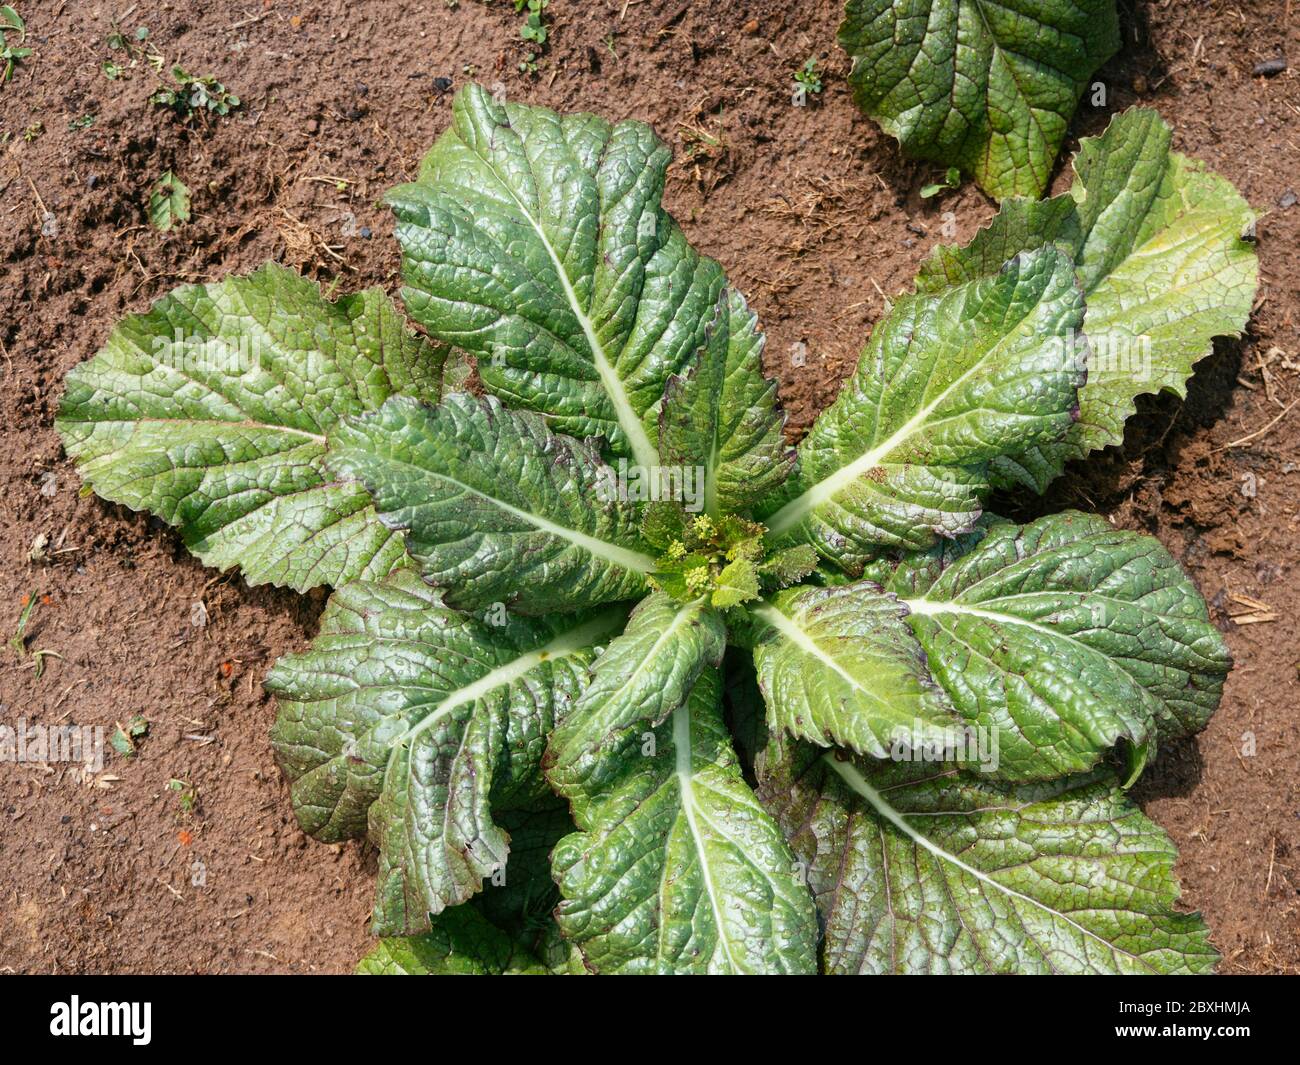 Giant Red Mustard plants in a vegetable garden. Stock Photo